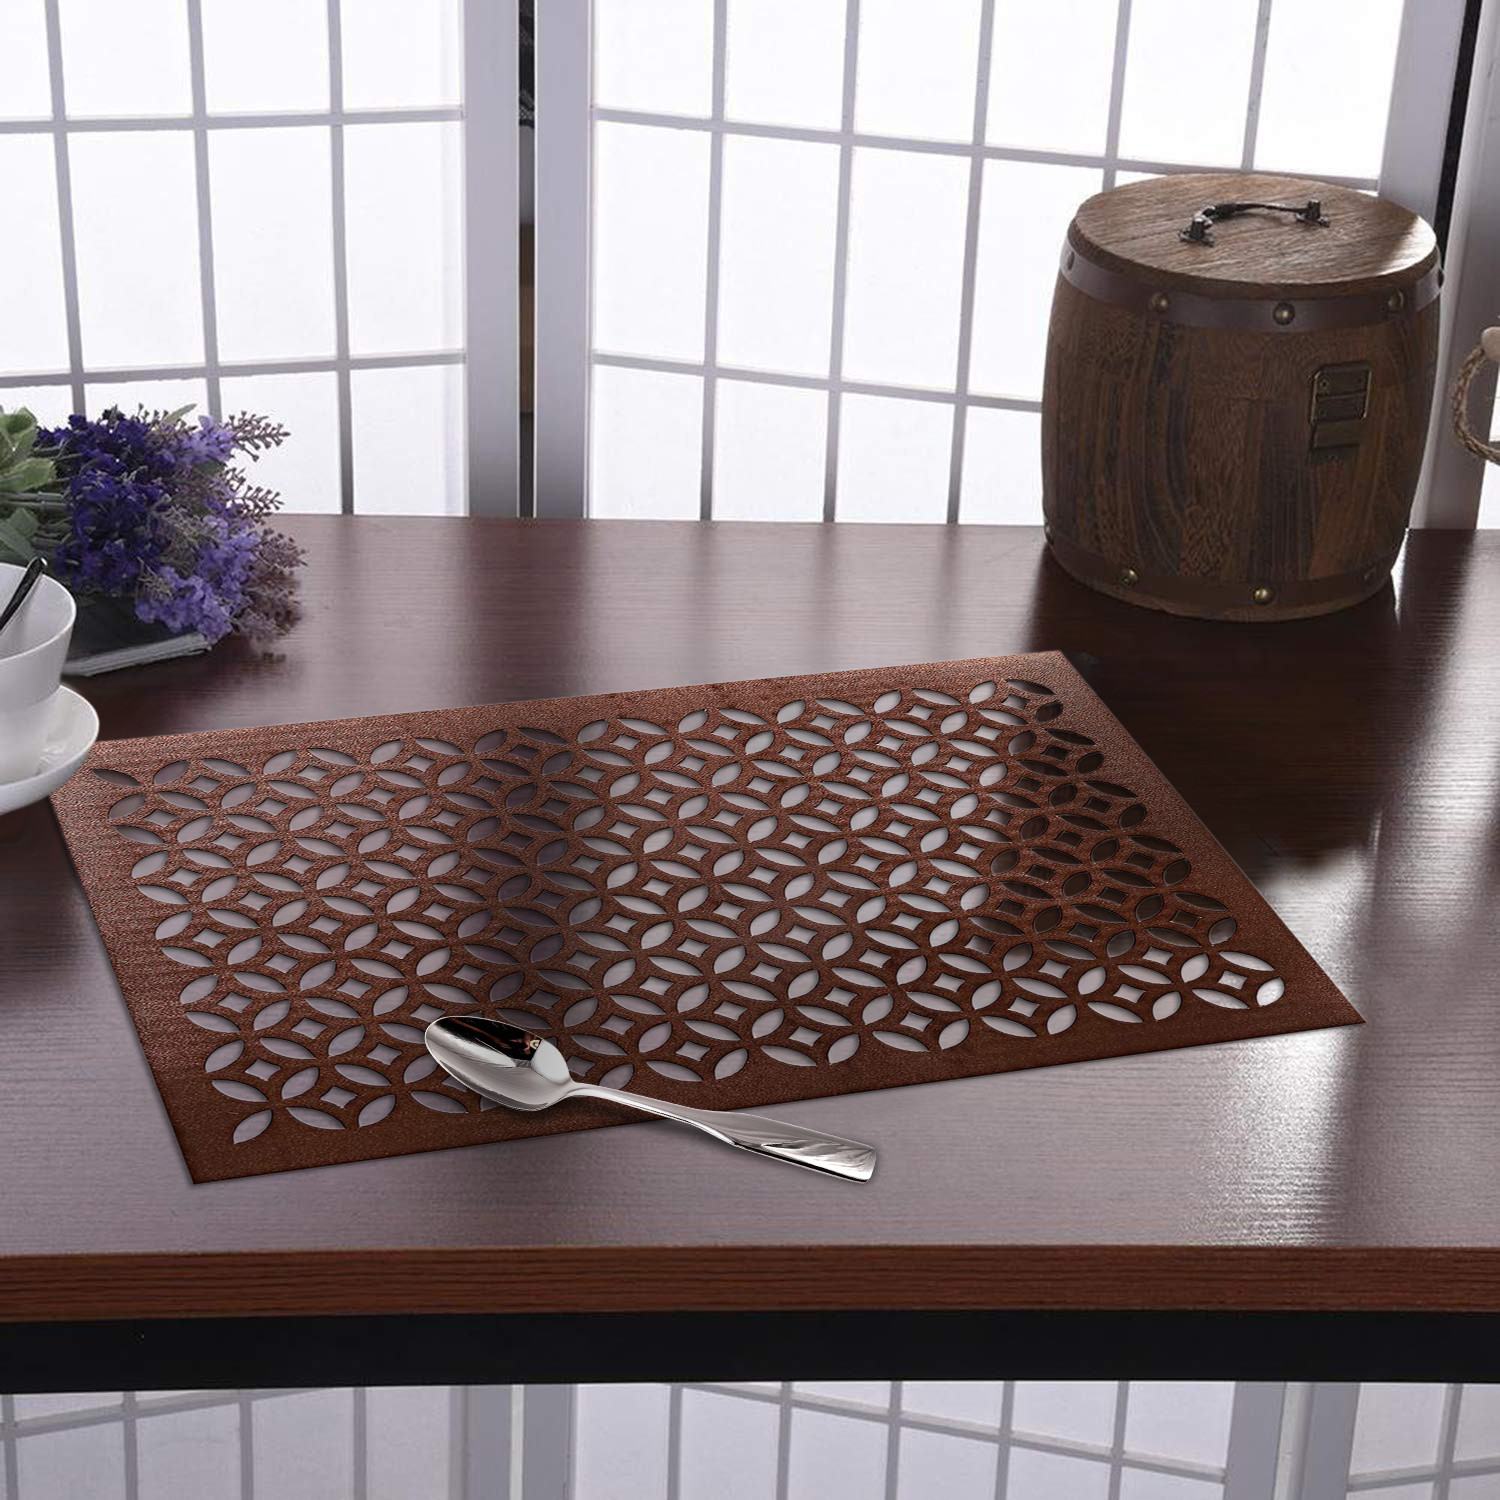 Kuber Industries Multiuses Arccircle Design PVC Rectangle Placemat for kitchen, Dining Table Set of 6 (Copper)